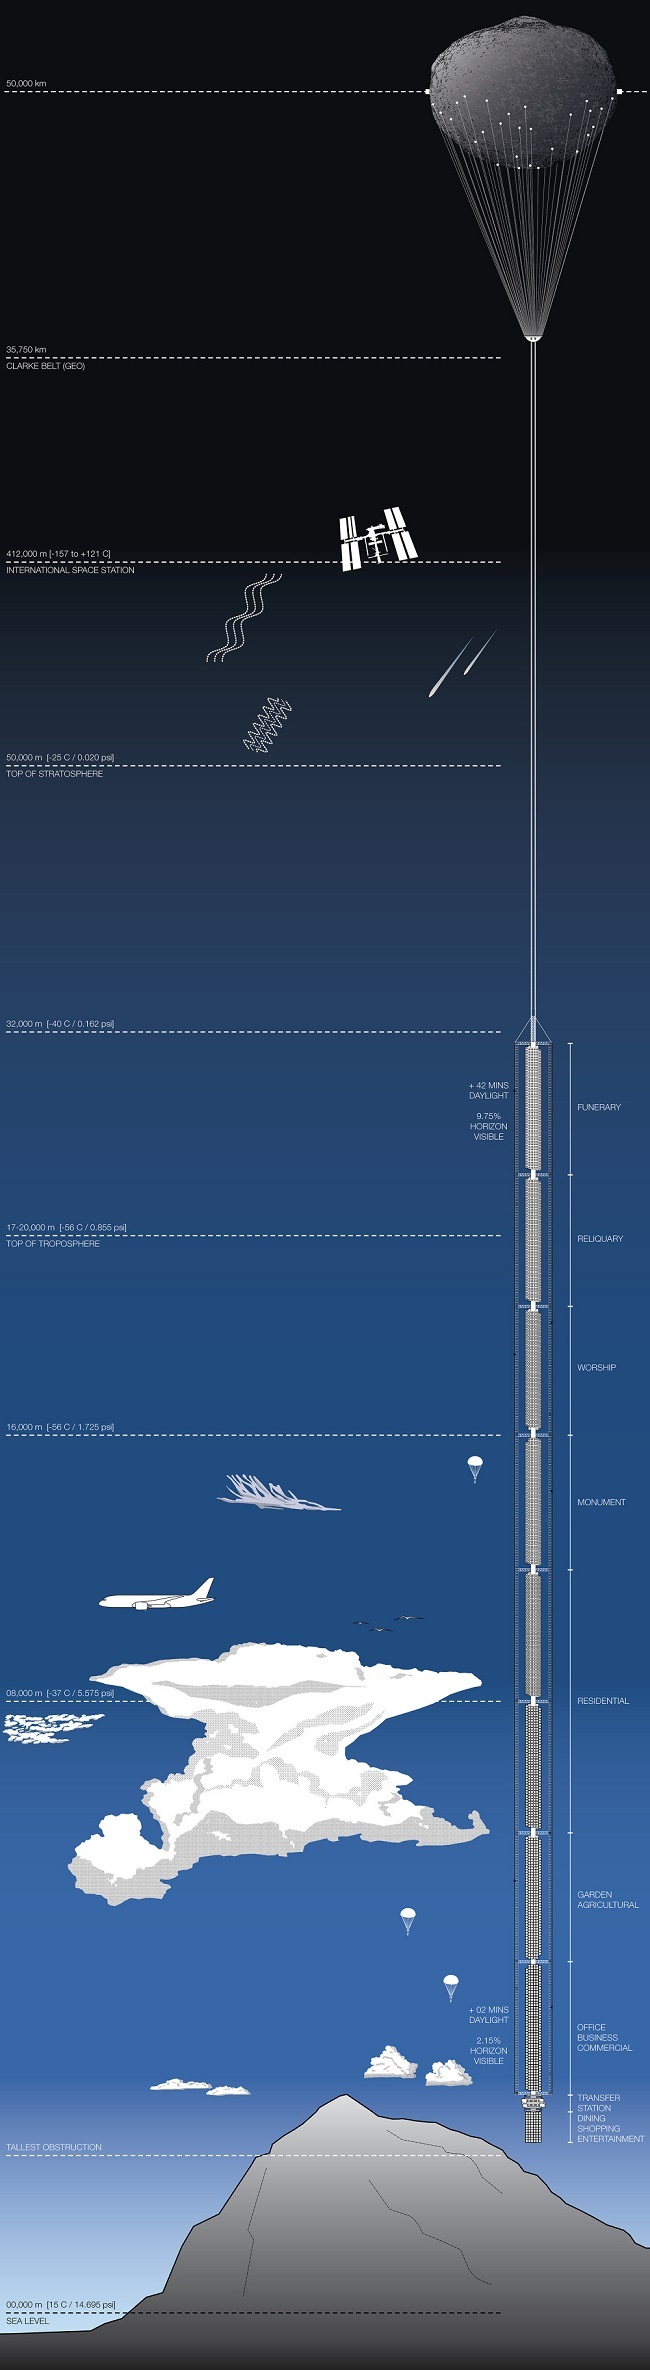 Analemma Tower infographic